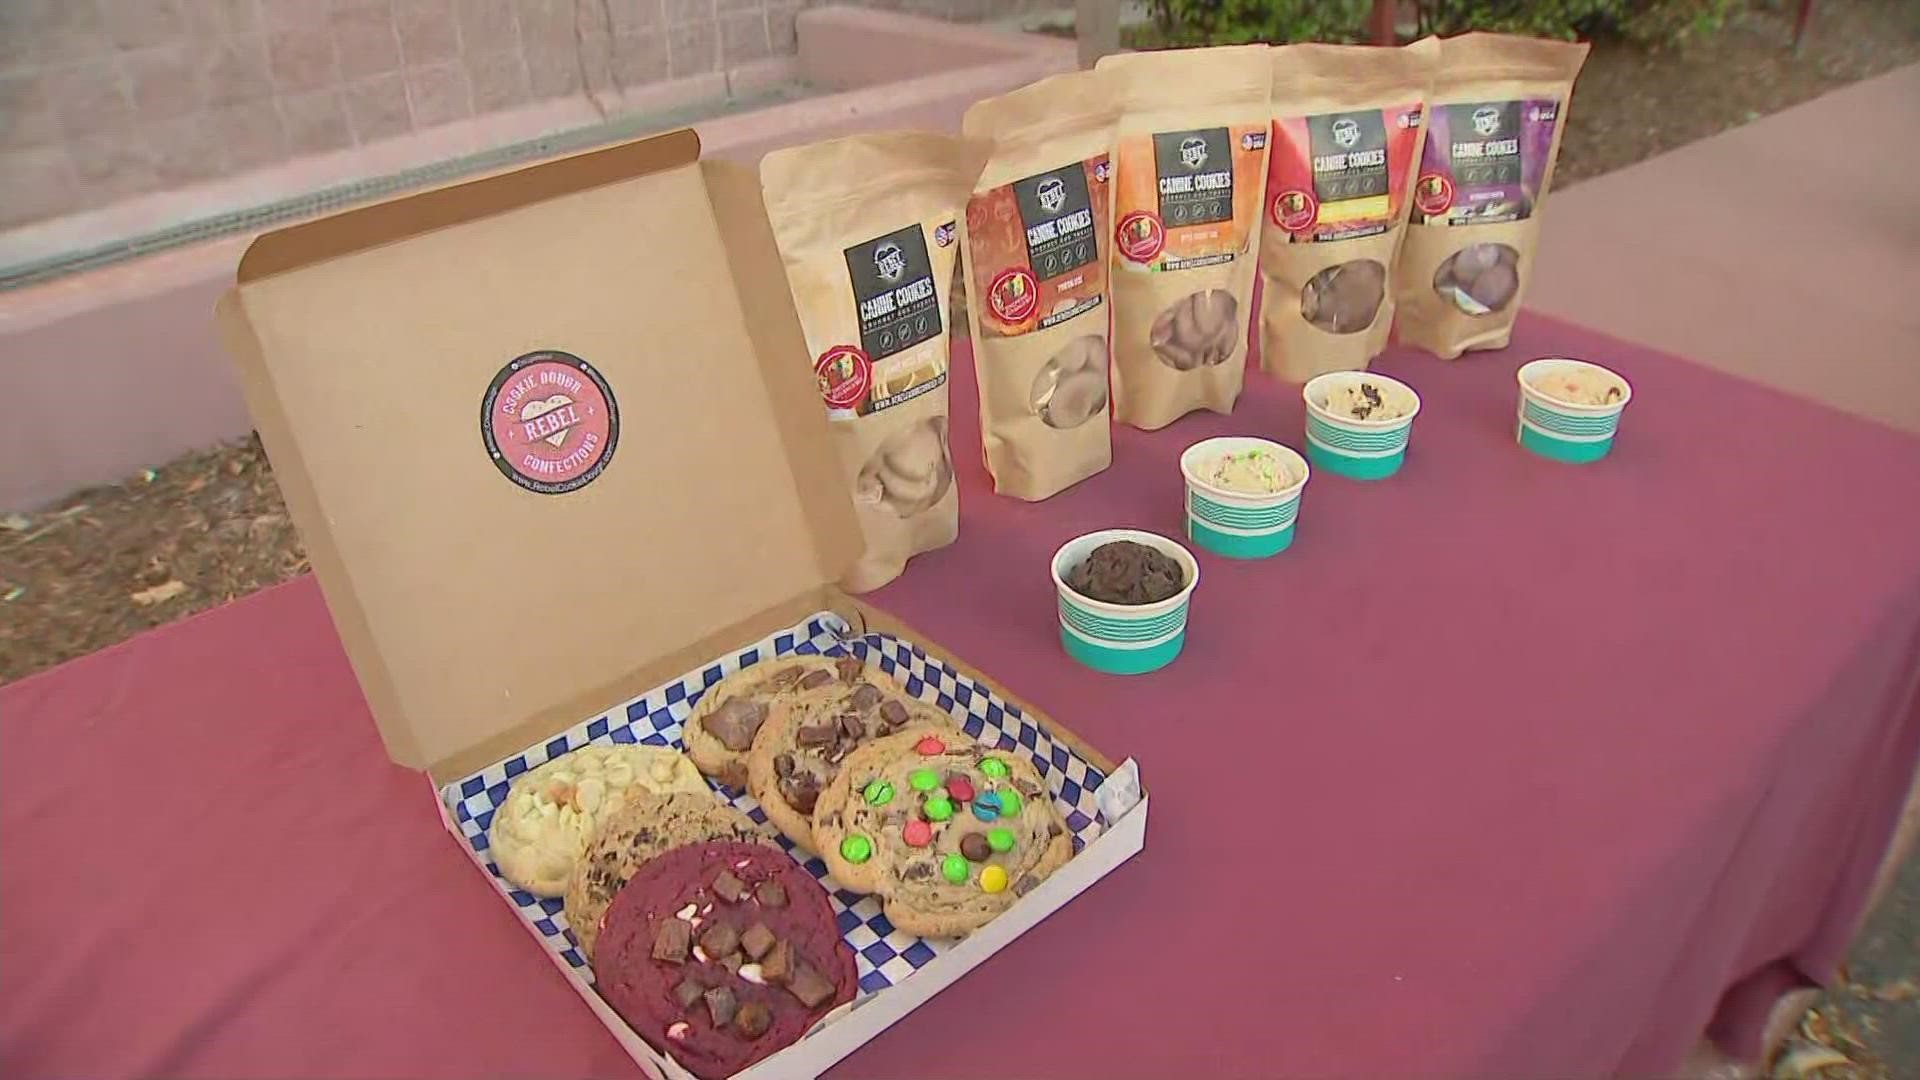 A local couple who owns two food trucks, What Would Cheesus Do and Rebel Cookie Dough, stopped by 9NEWS to show off some of their tasty offerings.